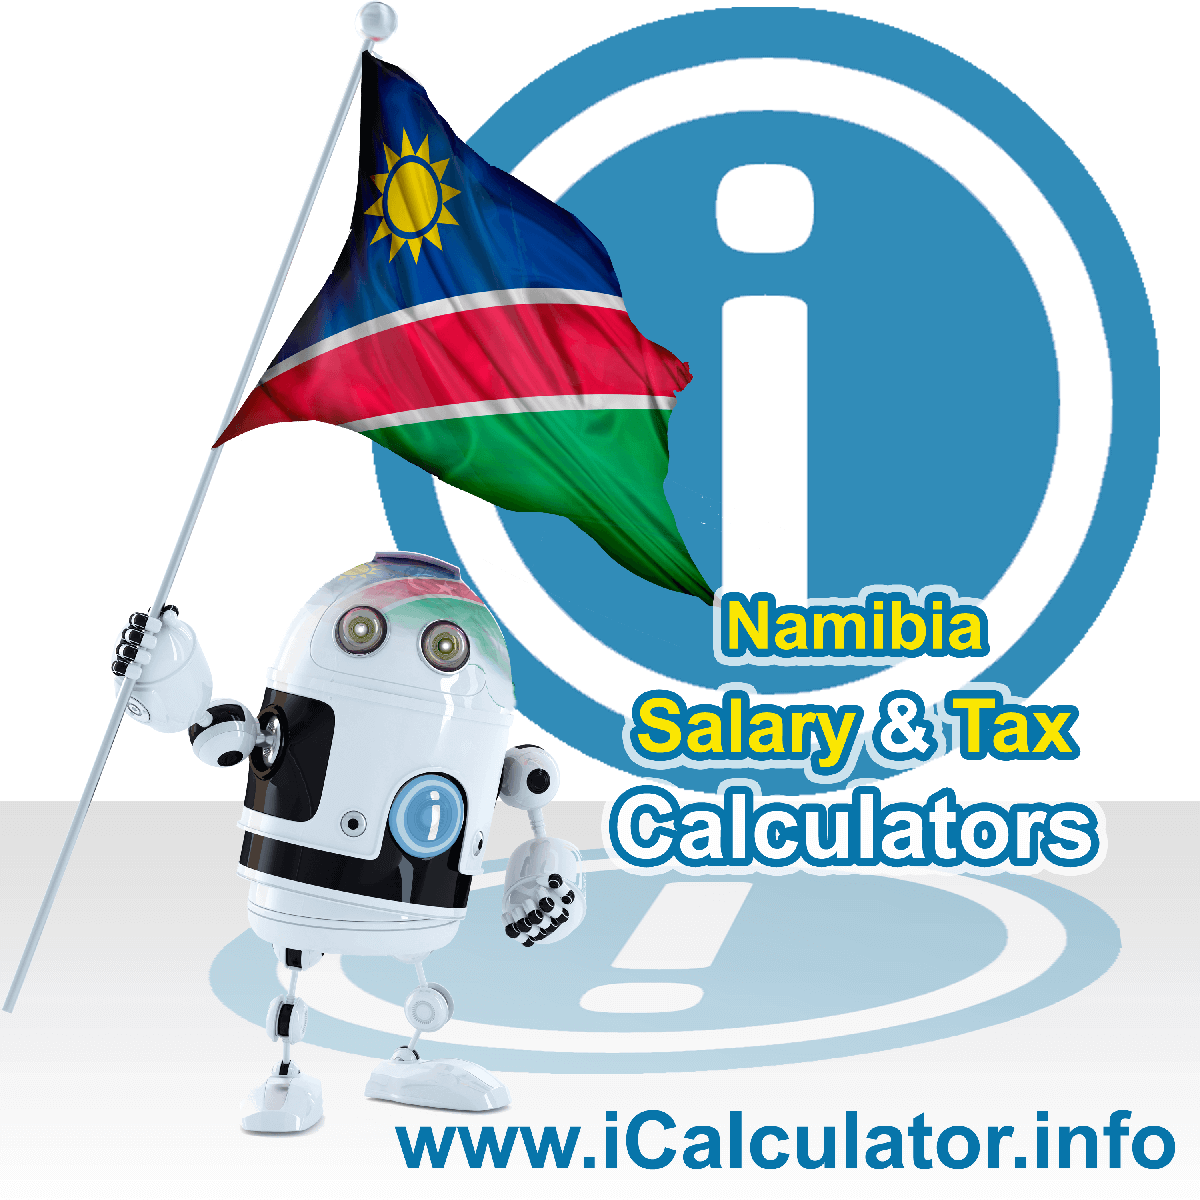 Namibia Tax Calculator. This image shows the Namibia flag and information relating to the tax formula for the Namibia Salary Calculator